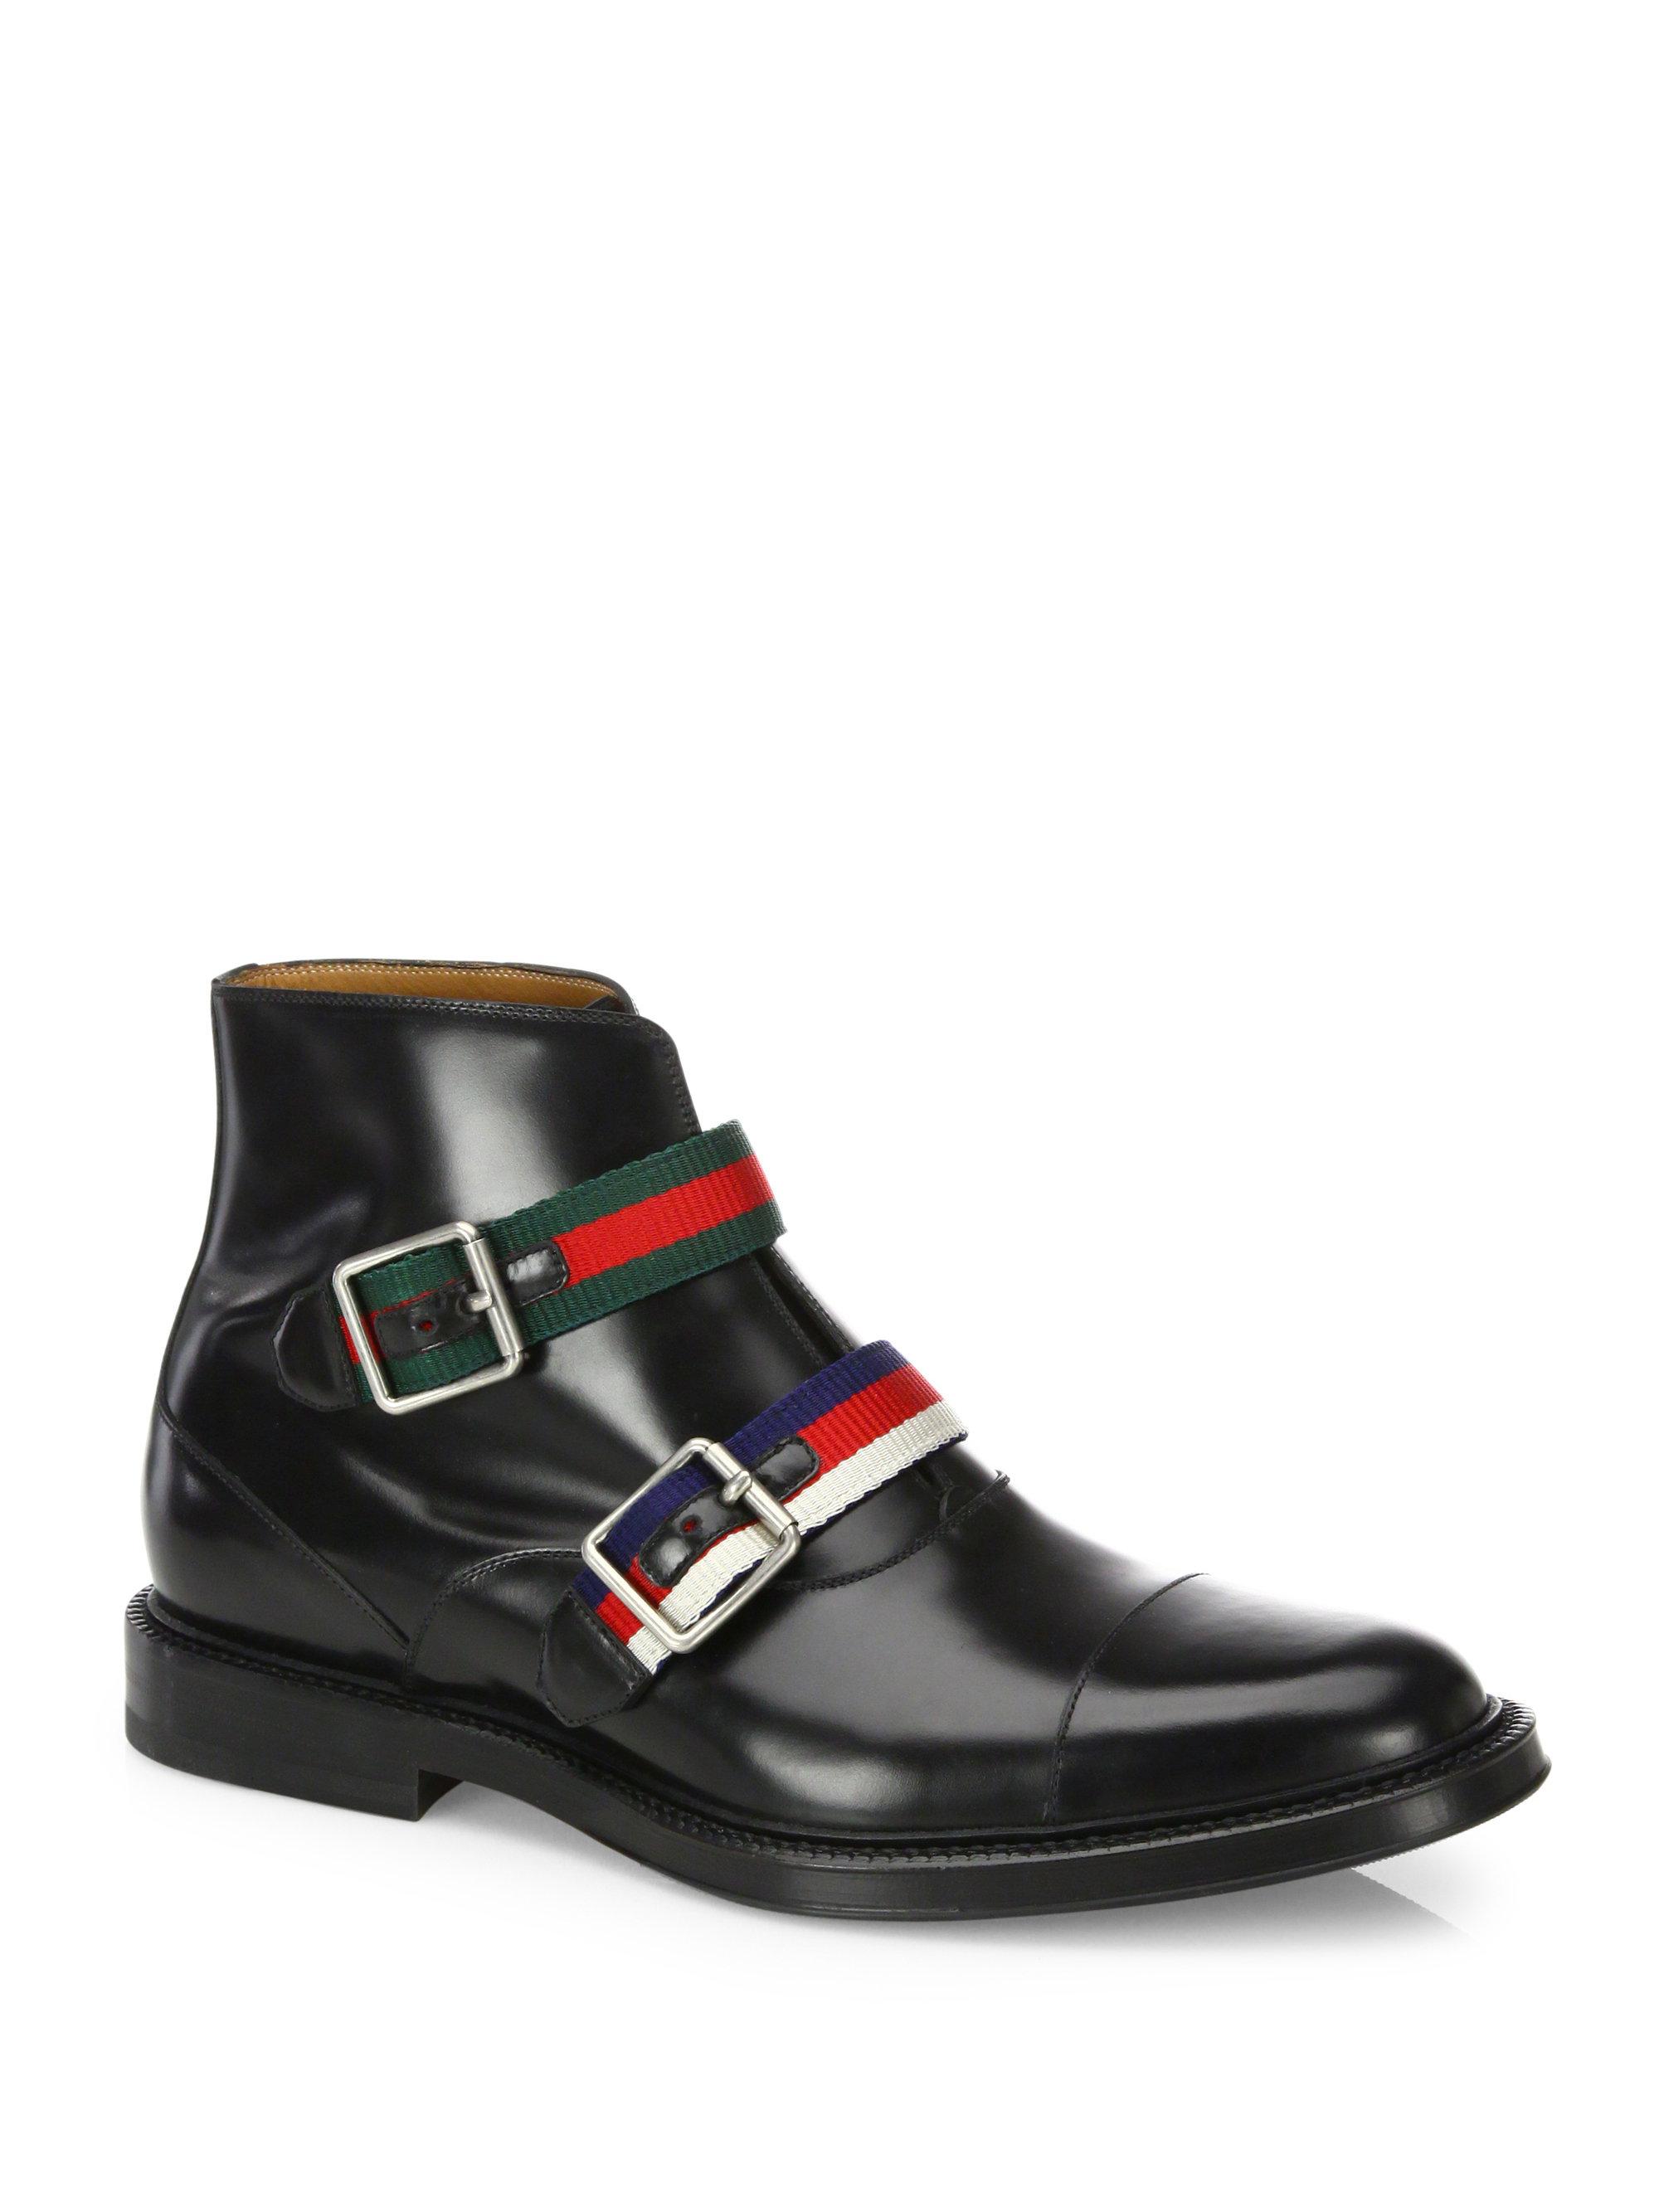 Lyst - Gucci Beyond Double Buckle Leather Ankle Boots in Black